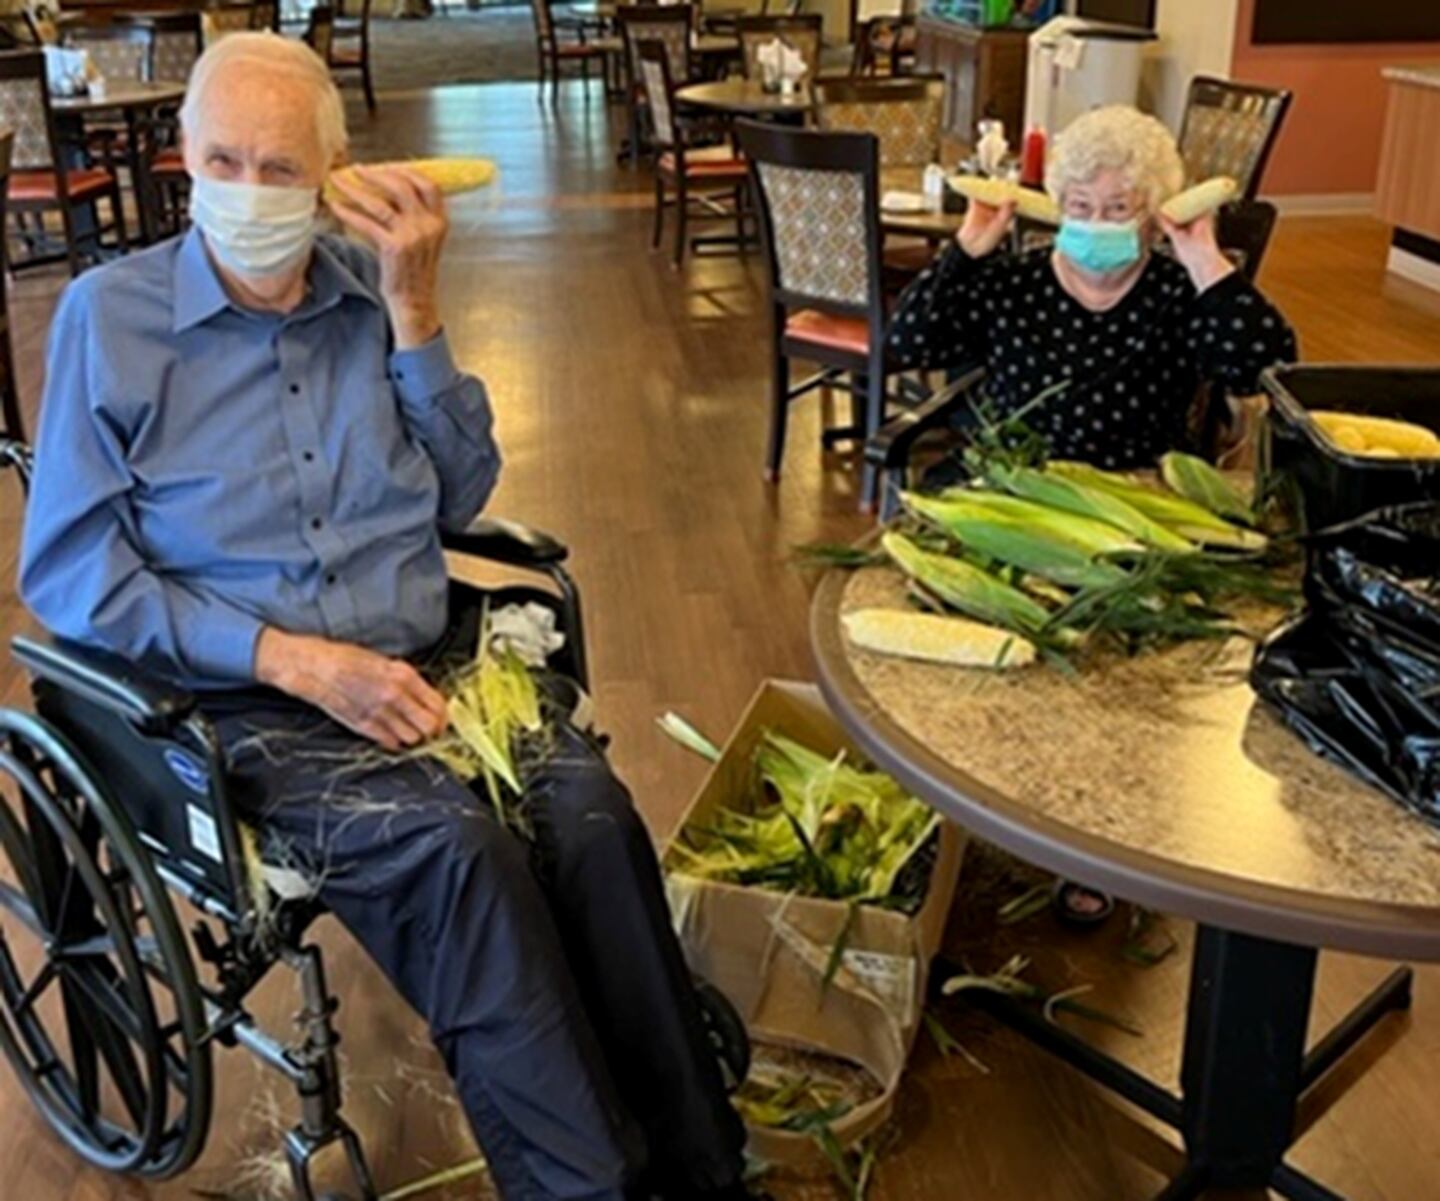 Resthave Care and Rehabilitation residents Don VanDerLeest and Tess Zilly shucking a batch of corn donated to the facility. Resthave residents and staff shuck the corn, which is then cut off of its ears and frozen into bags to be enjoyed by the residents at a later date.